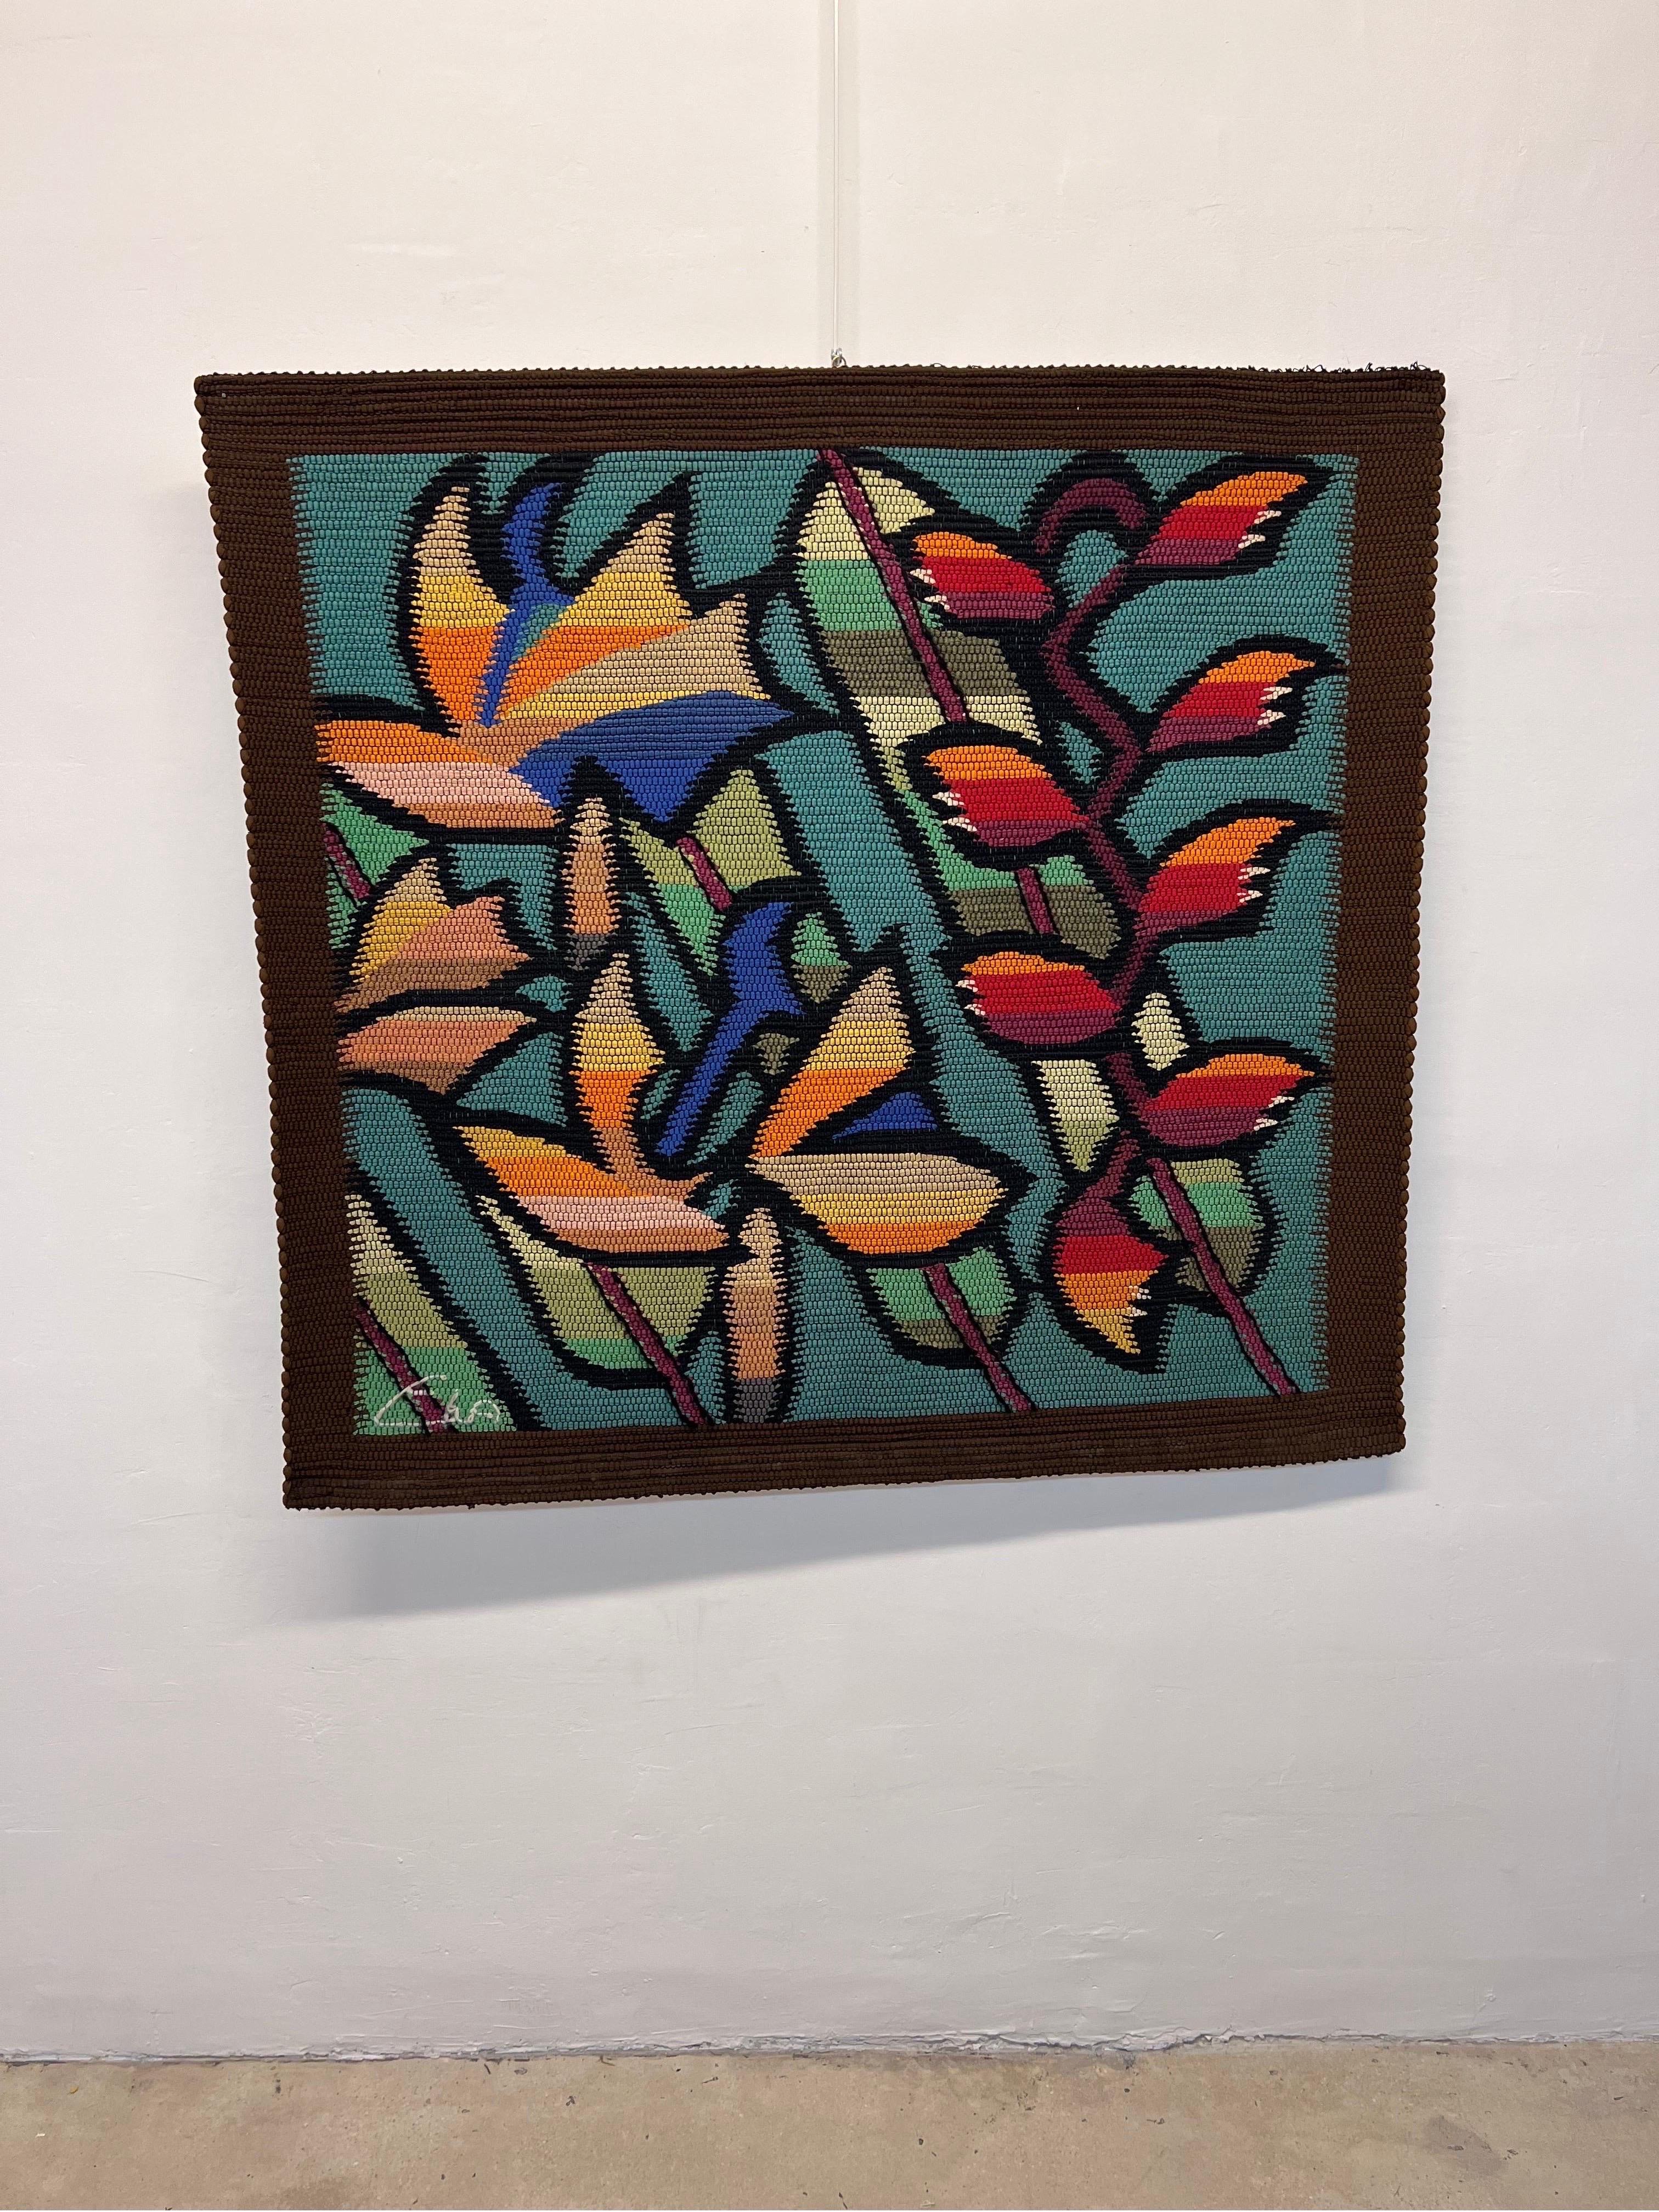 Eila Ampula fiber art floral tapestry handcrafted in Brazil, 1980s.

Eila Ampula was a well-known Brazilian artist who specialized in tapestry design. Her work has been exhibited in galleries, consulates and museums around the world. This piece is a